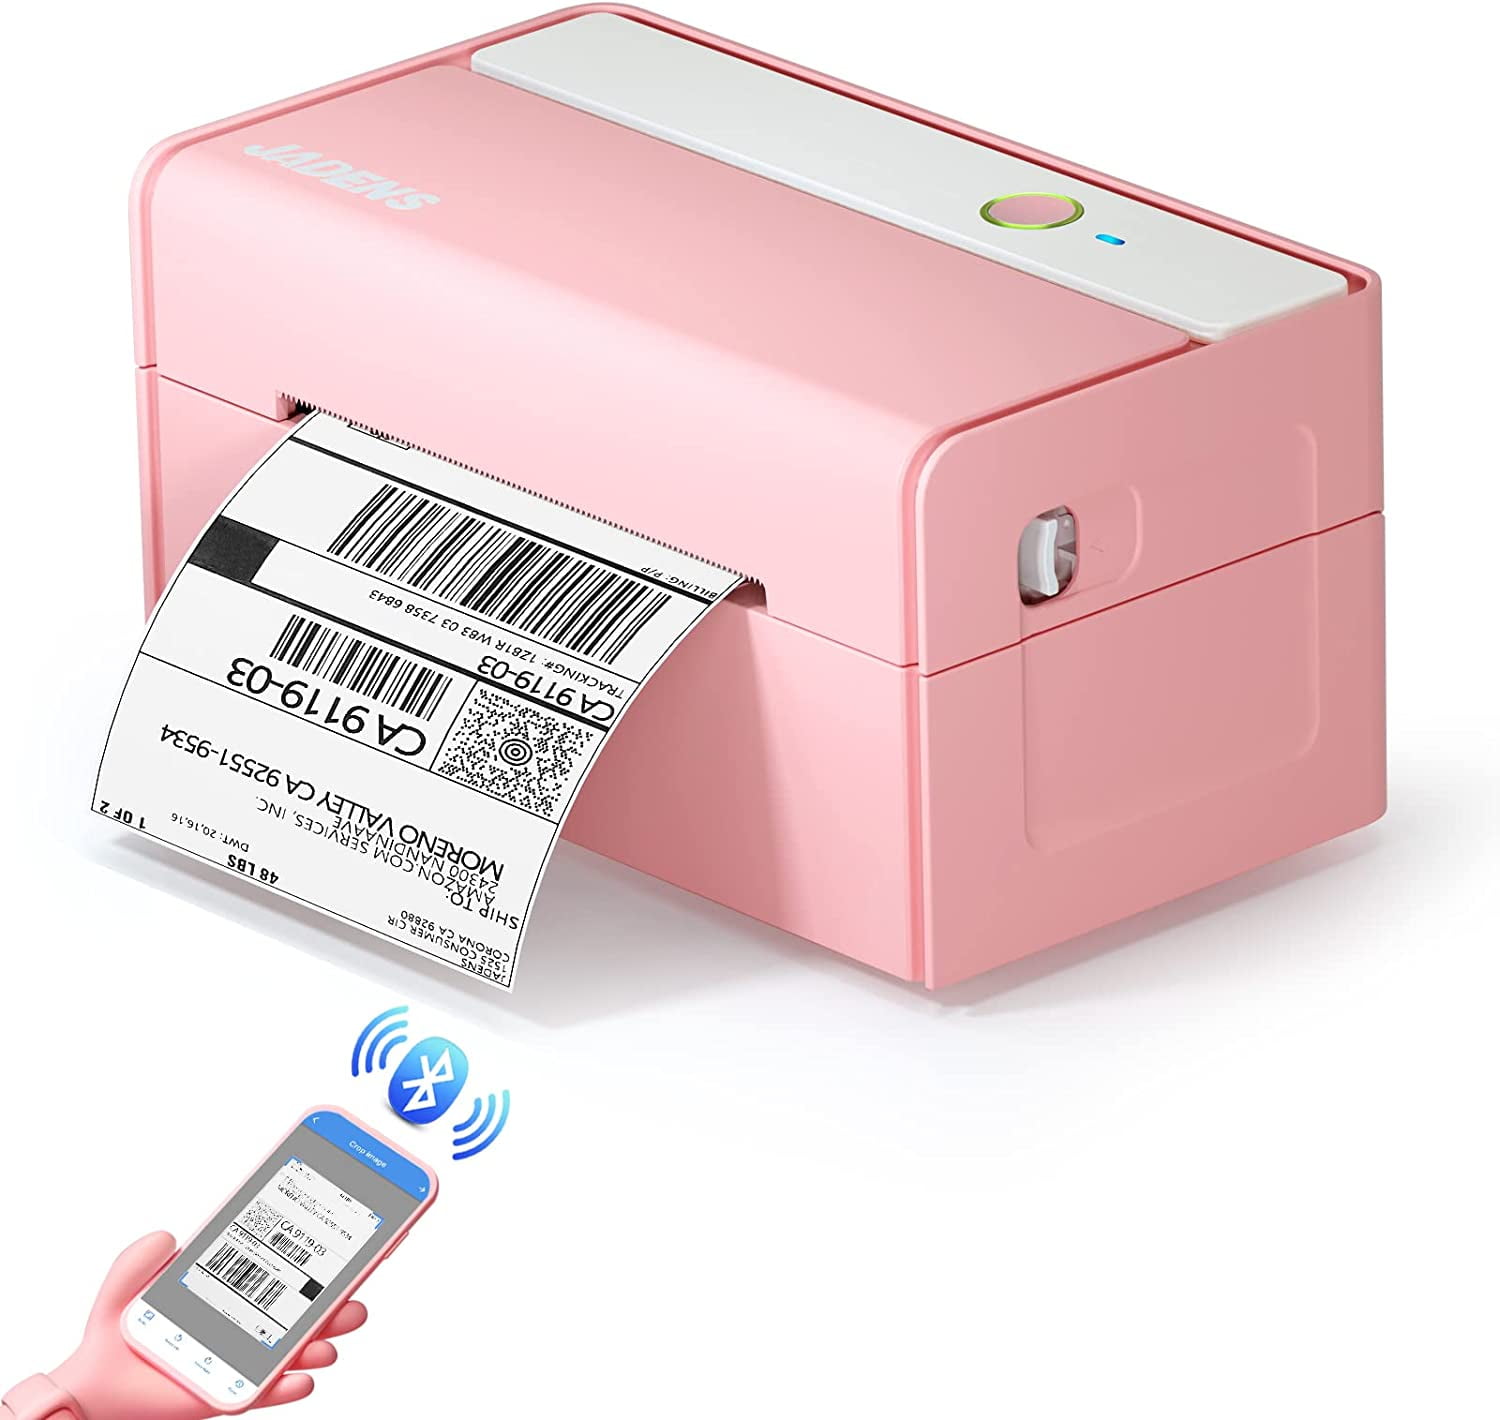 MUNBYN Pink Shipping Label Printer, [Upgraded 2.0] USB Label Printer Maker  for Shipping Packages Labels 4x6 Thermal Printer for Home Business